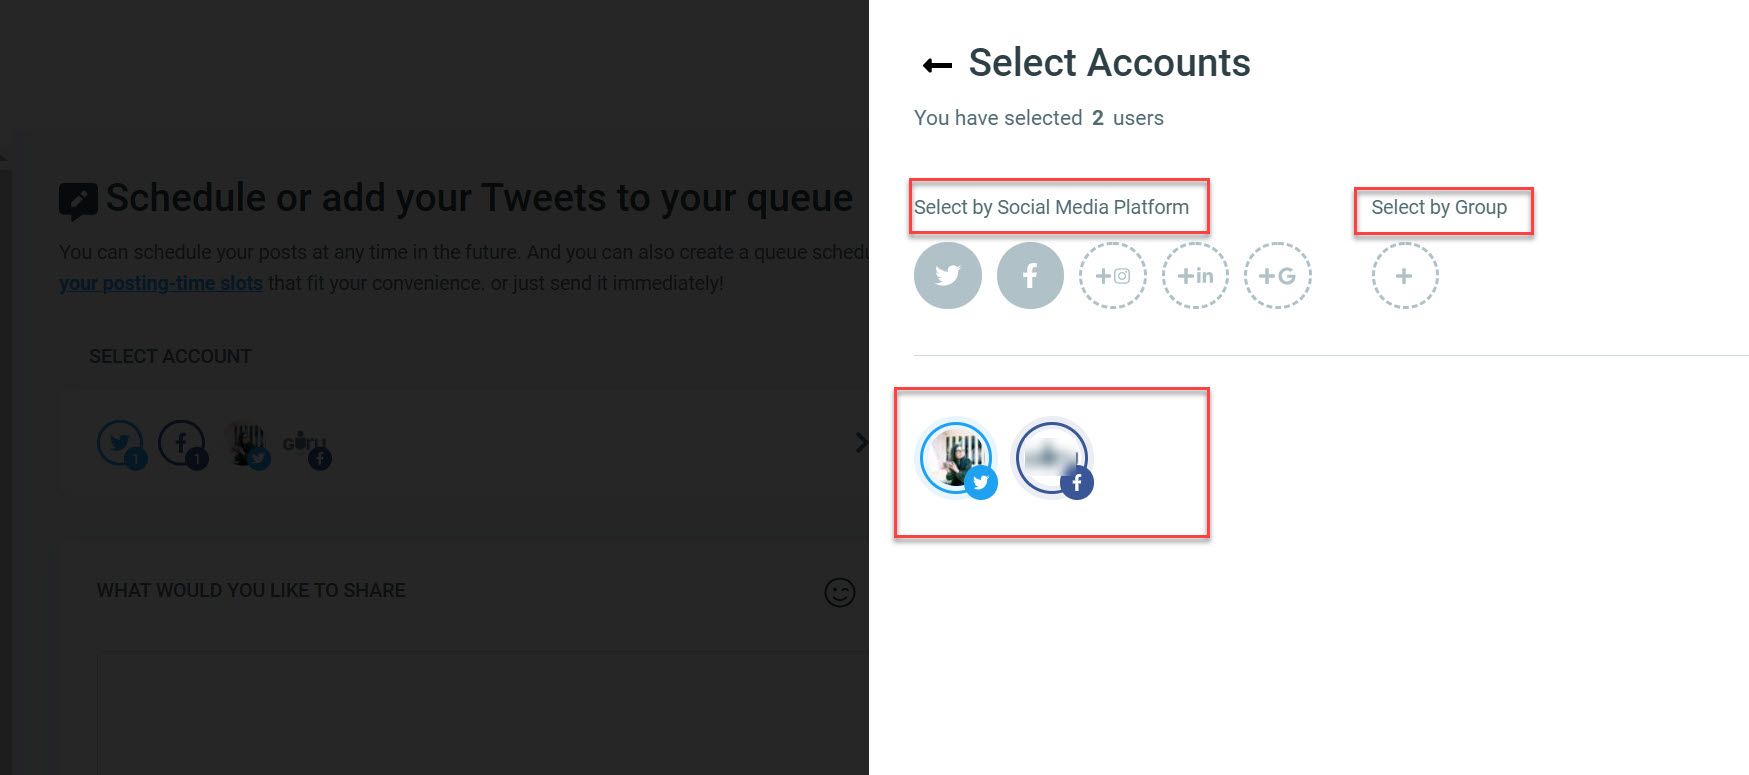 Even further, you can add multiple accounts to groups to manage different social media accounts of the same brand for instance.